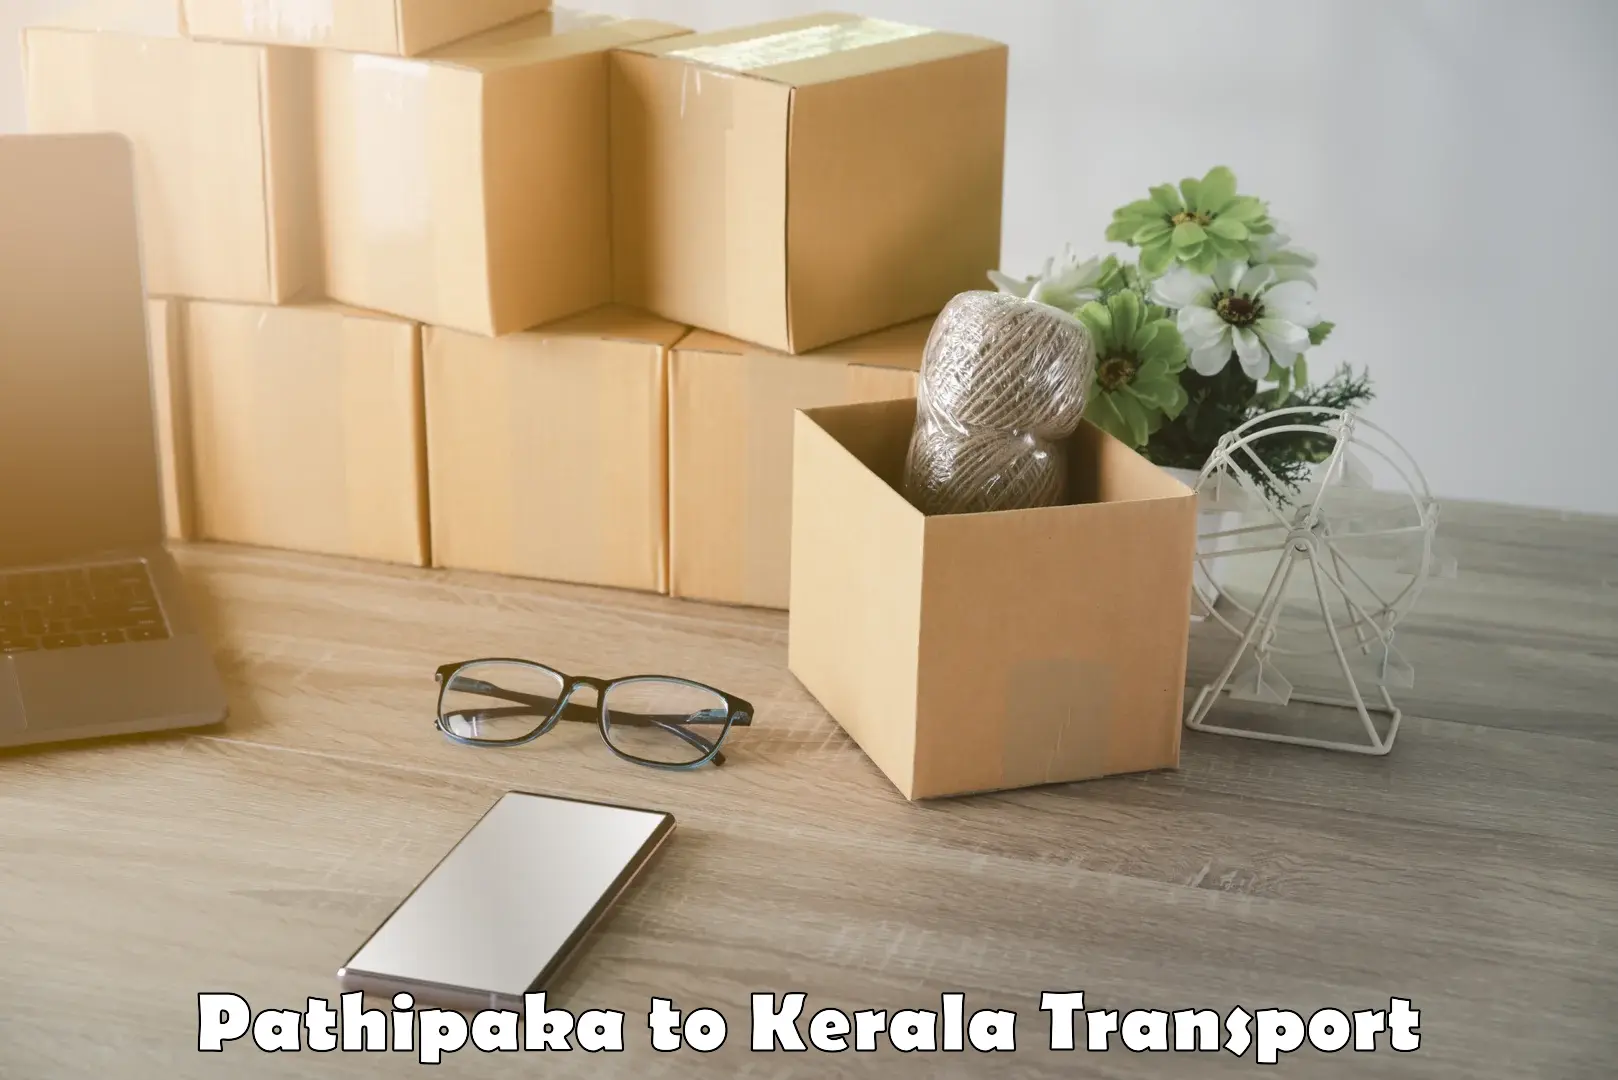 Online transport service Pathipaka to Thrissur